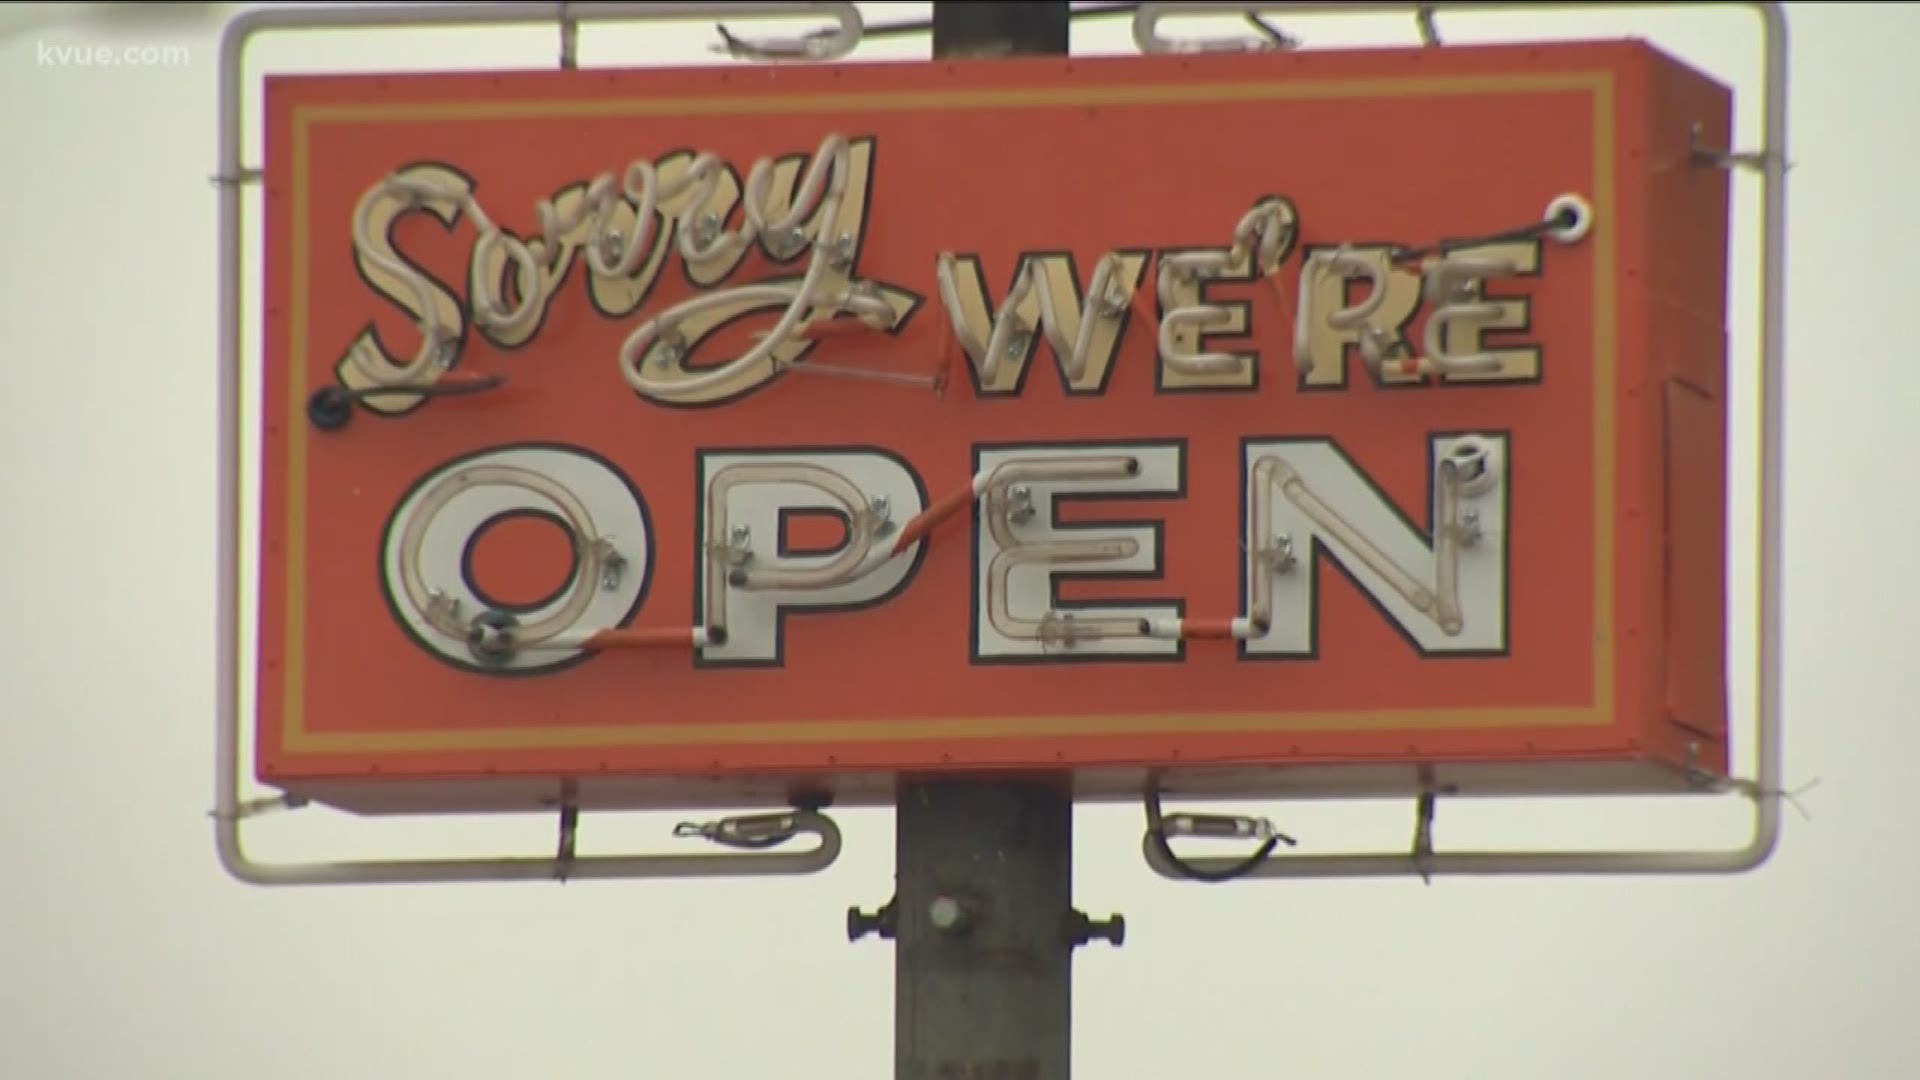 Jenni Lee spoke with a couple of Austin restaurant owners, who said it's only a matter of time before the City places further restrictions on restaurants.